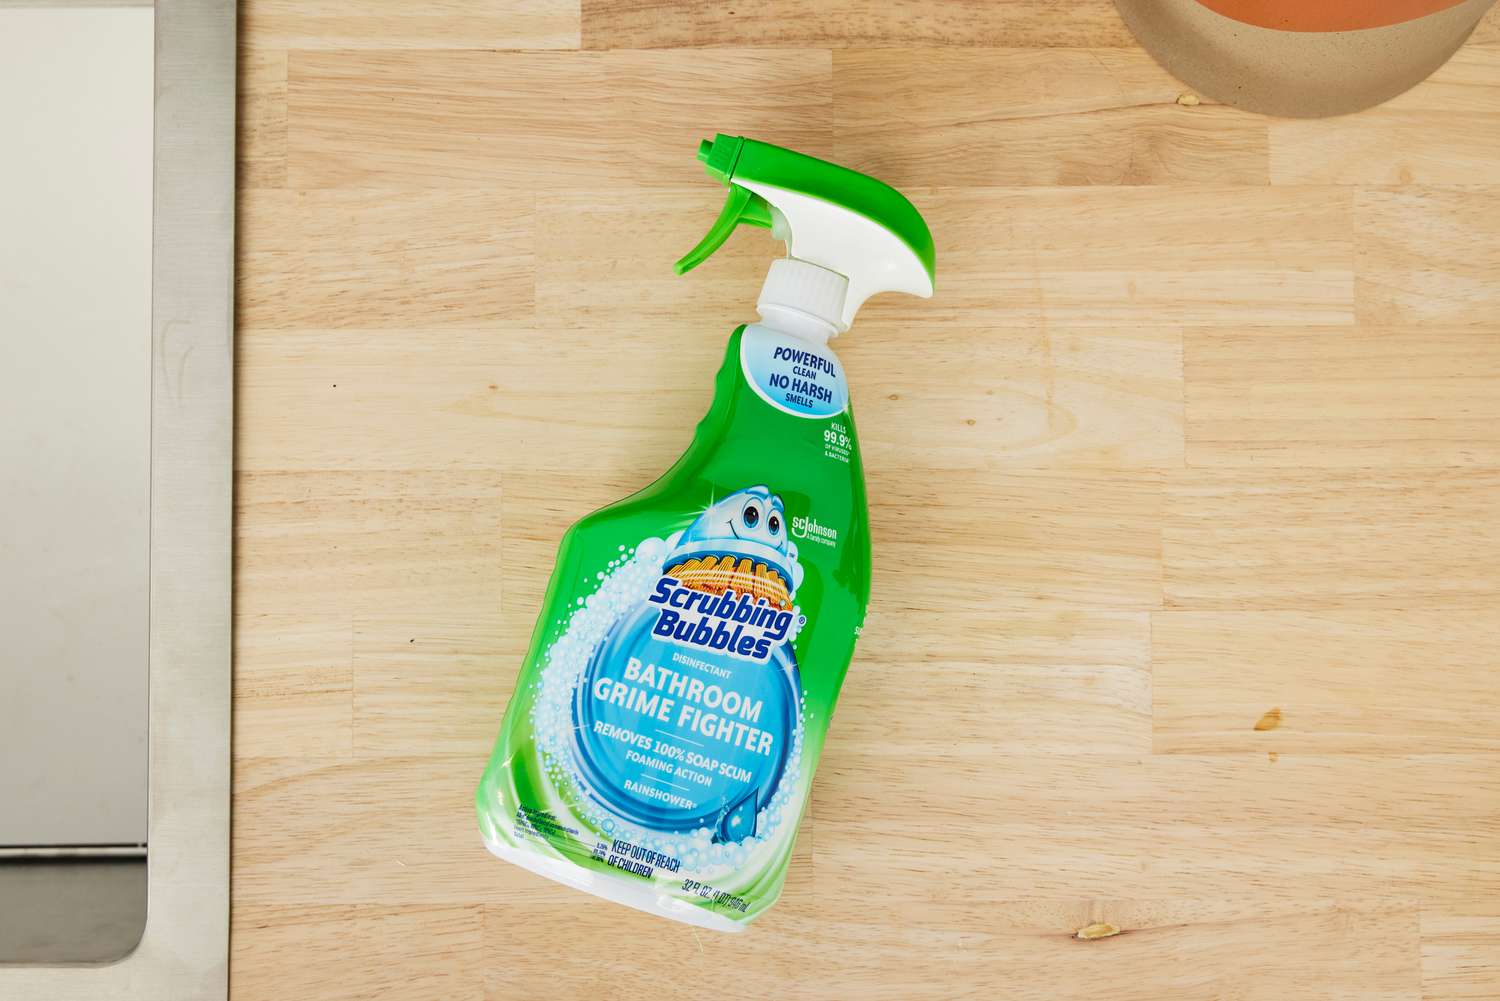 A bottle of Scrubbing Bubbles Disinfectant Bathroom Grime Fighter Spray on a wooden countertop